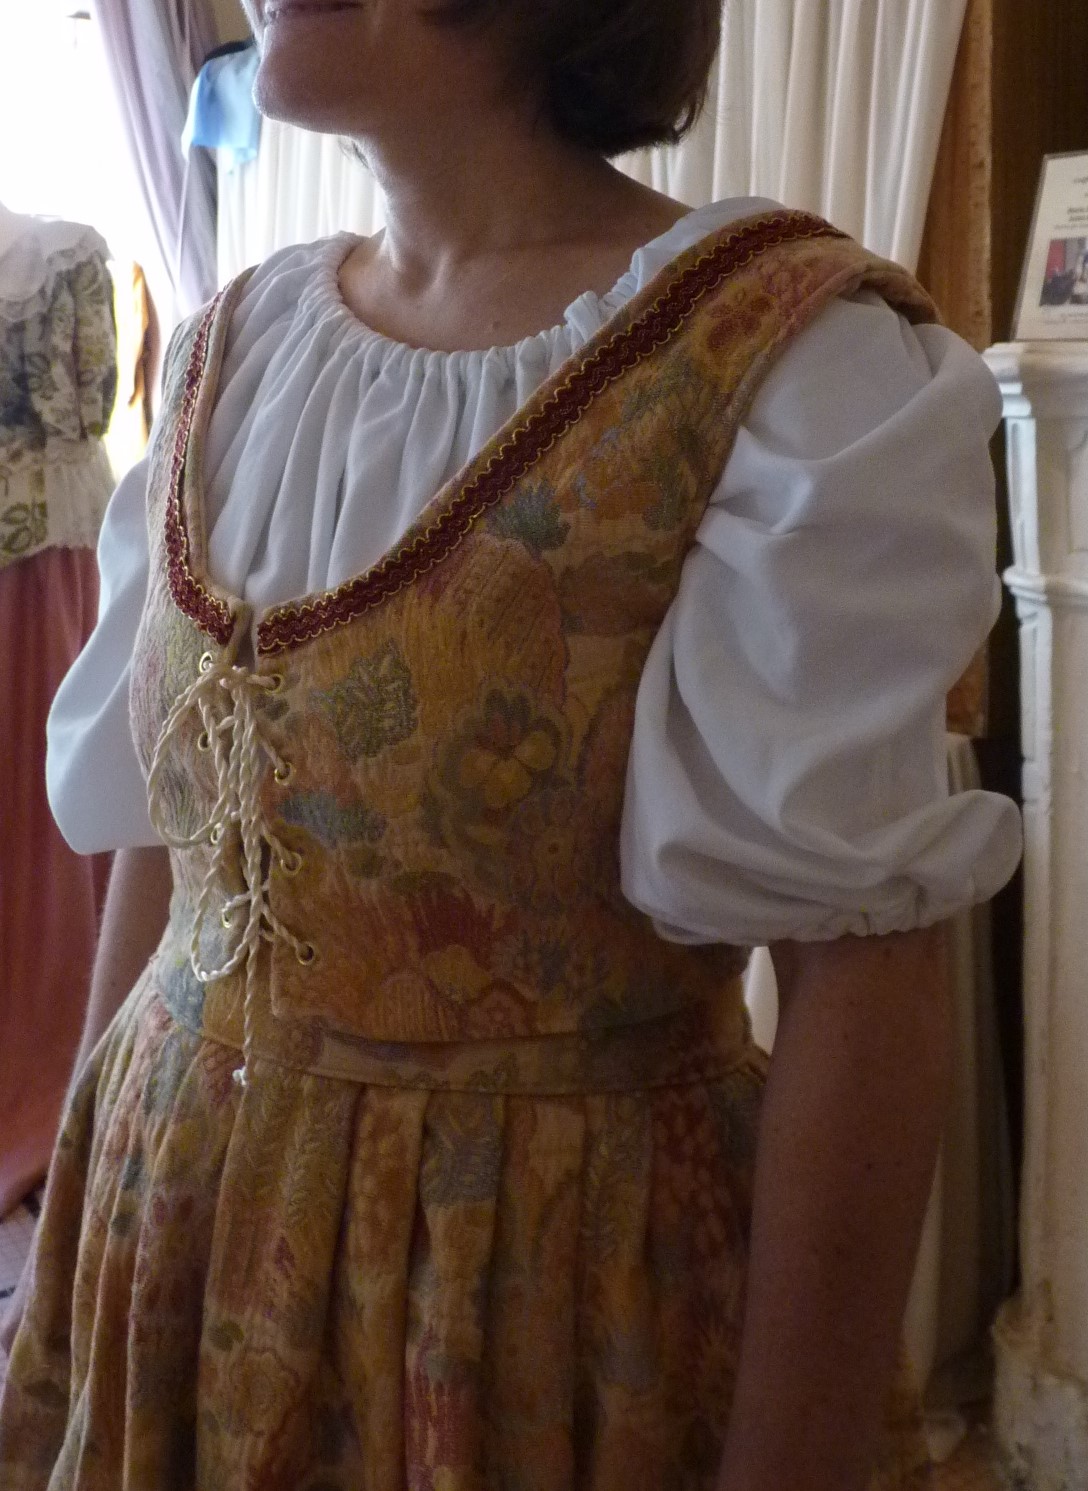 Detail of the Lady Honorime’s costume